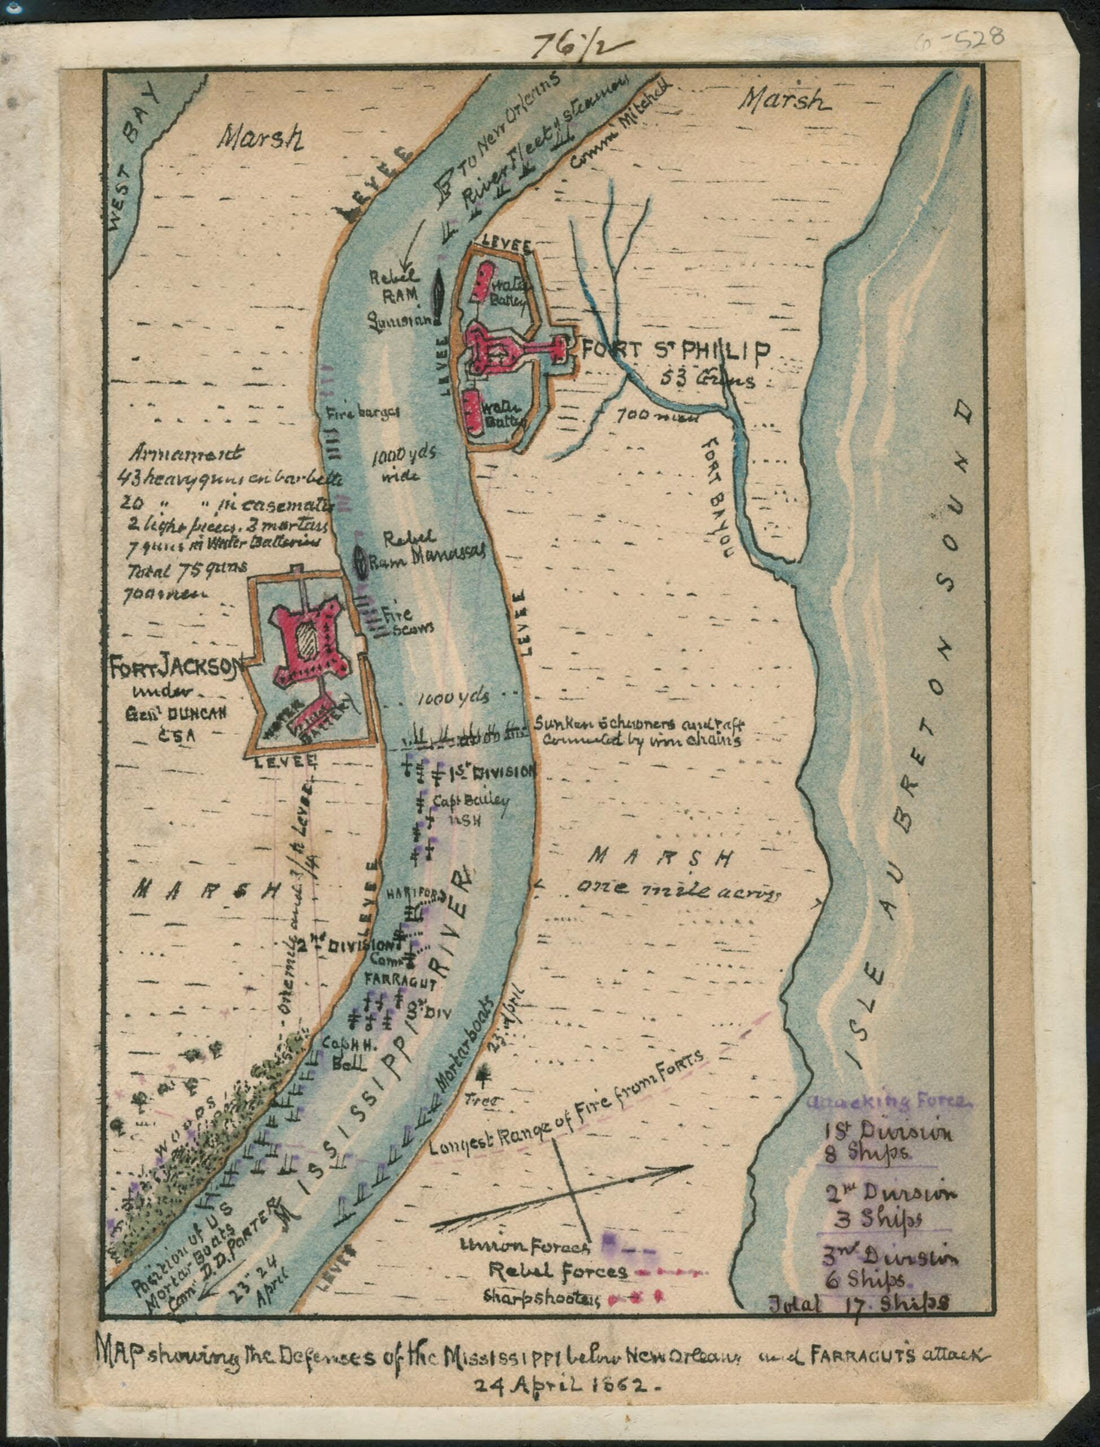 This old map of Map Showing the Defenses of the Mississippi Below New Orleans and Farragut&